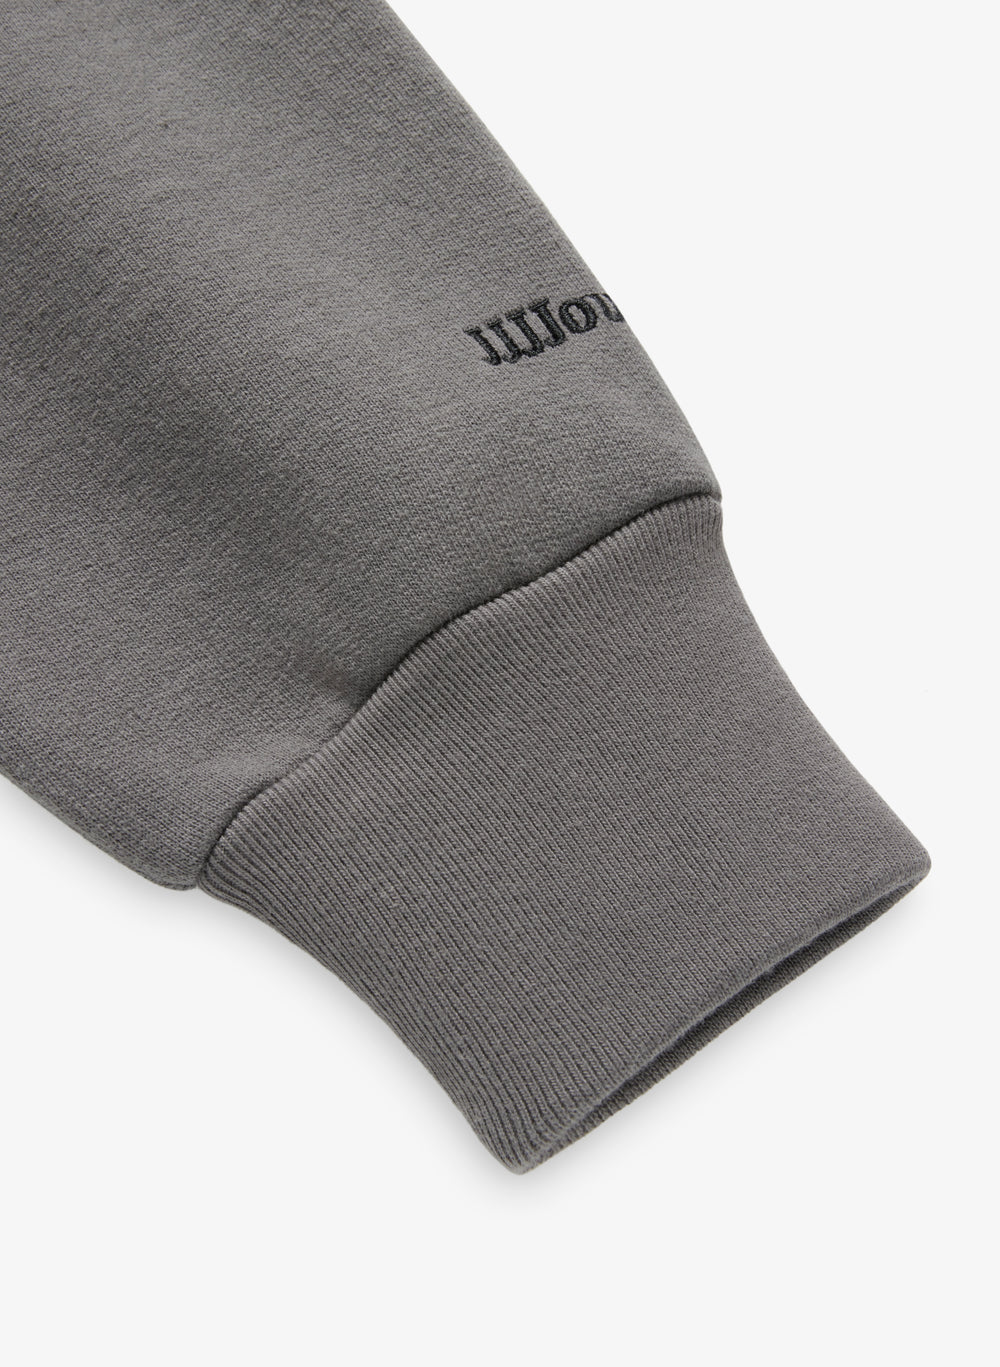 J90 Hoodie - Charcoal French Terry